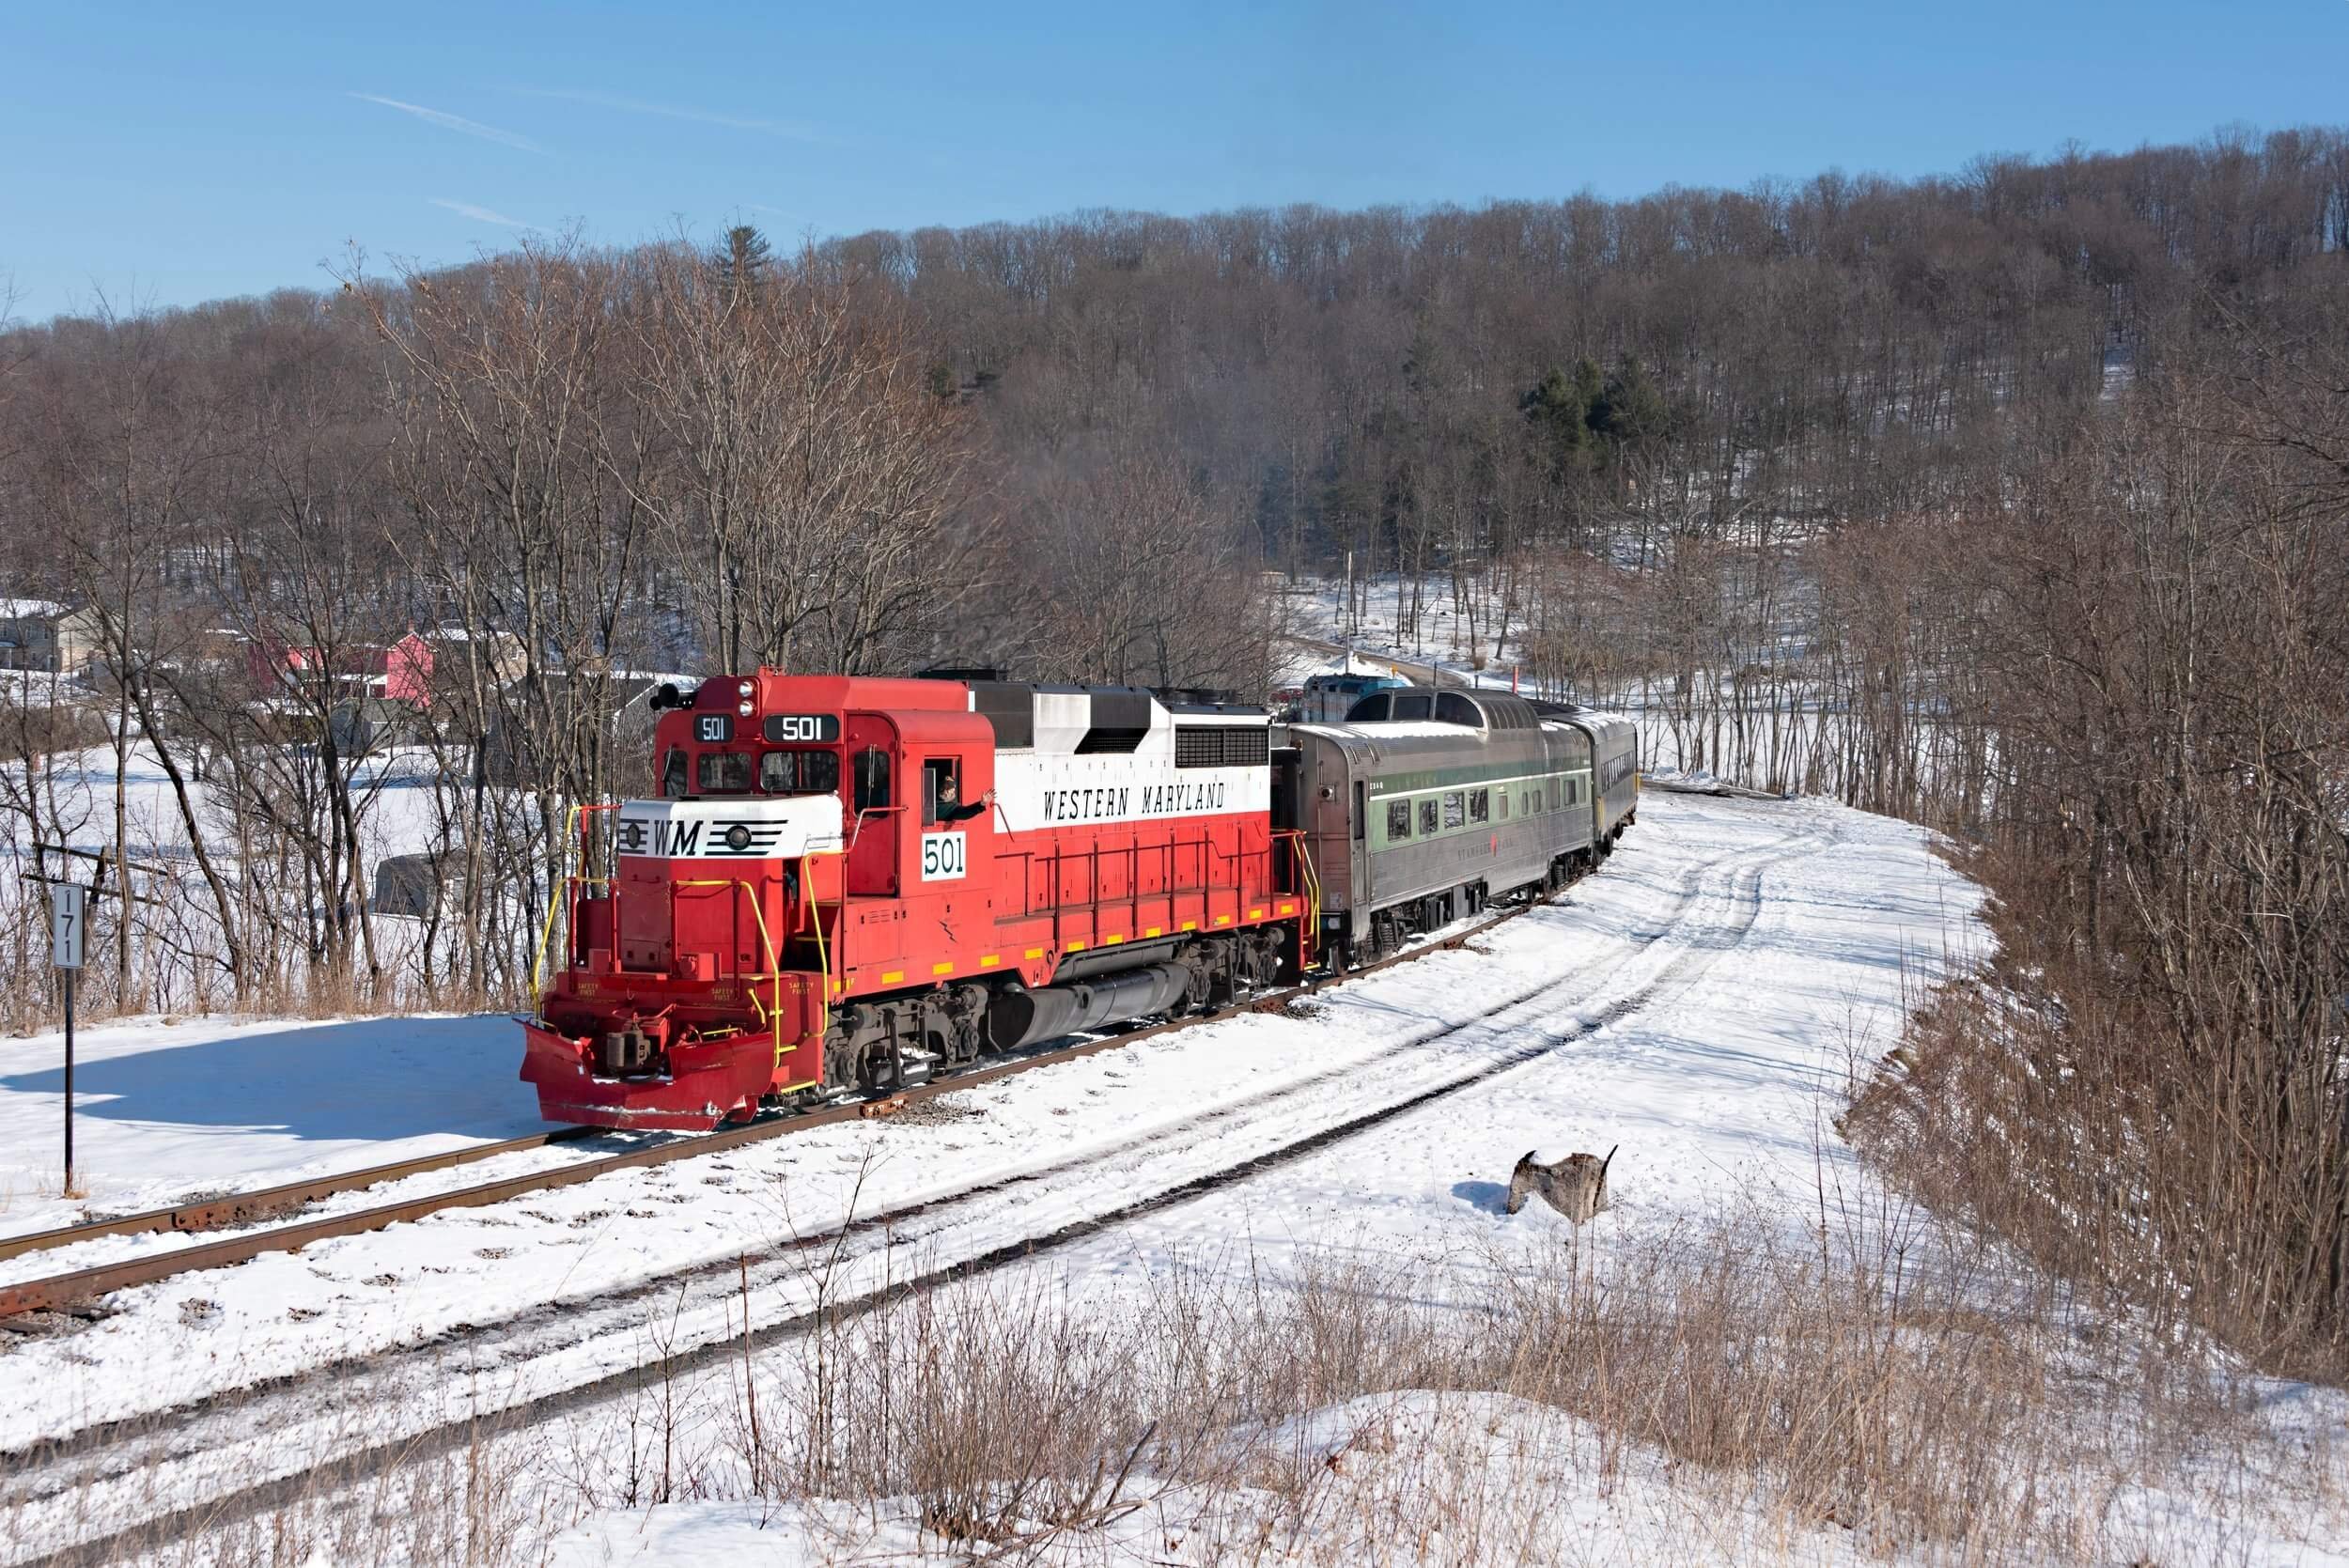 Western Maryland Scenic Railroad Frostburg Flyer Winter Service traverses the scenic route between Cumberland and Frostburg, Maryland with a full brunch menu and bar.